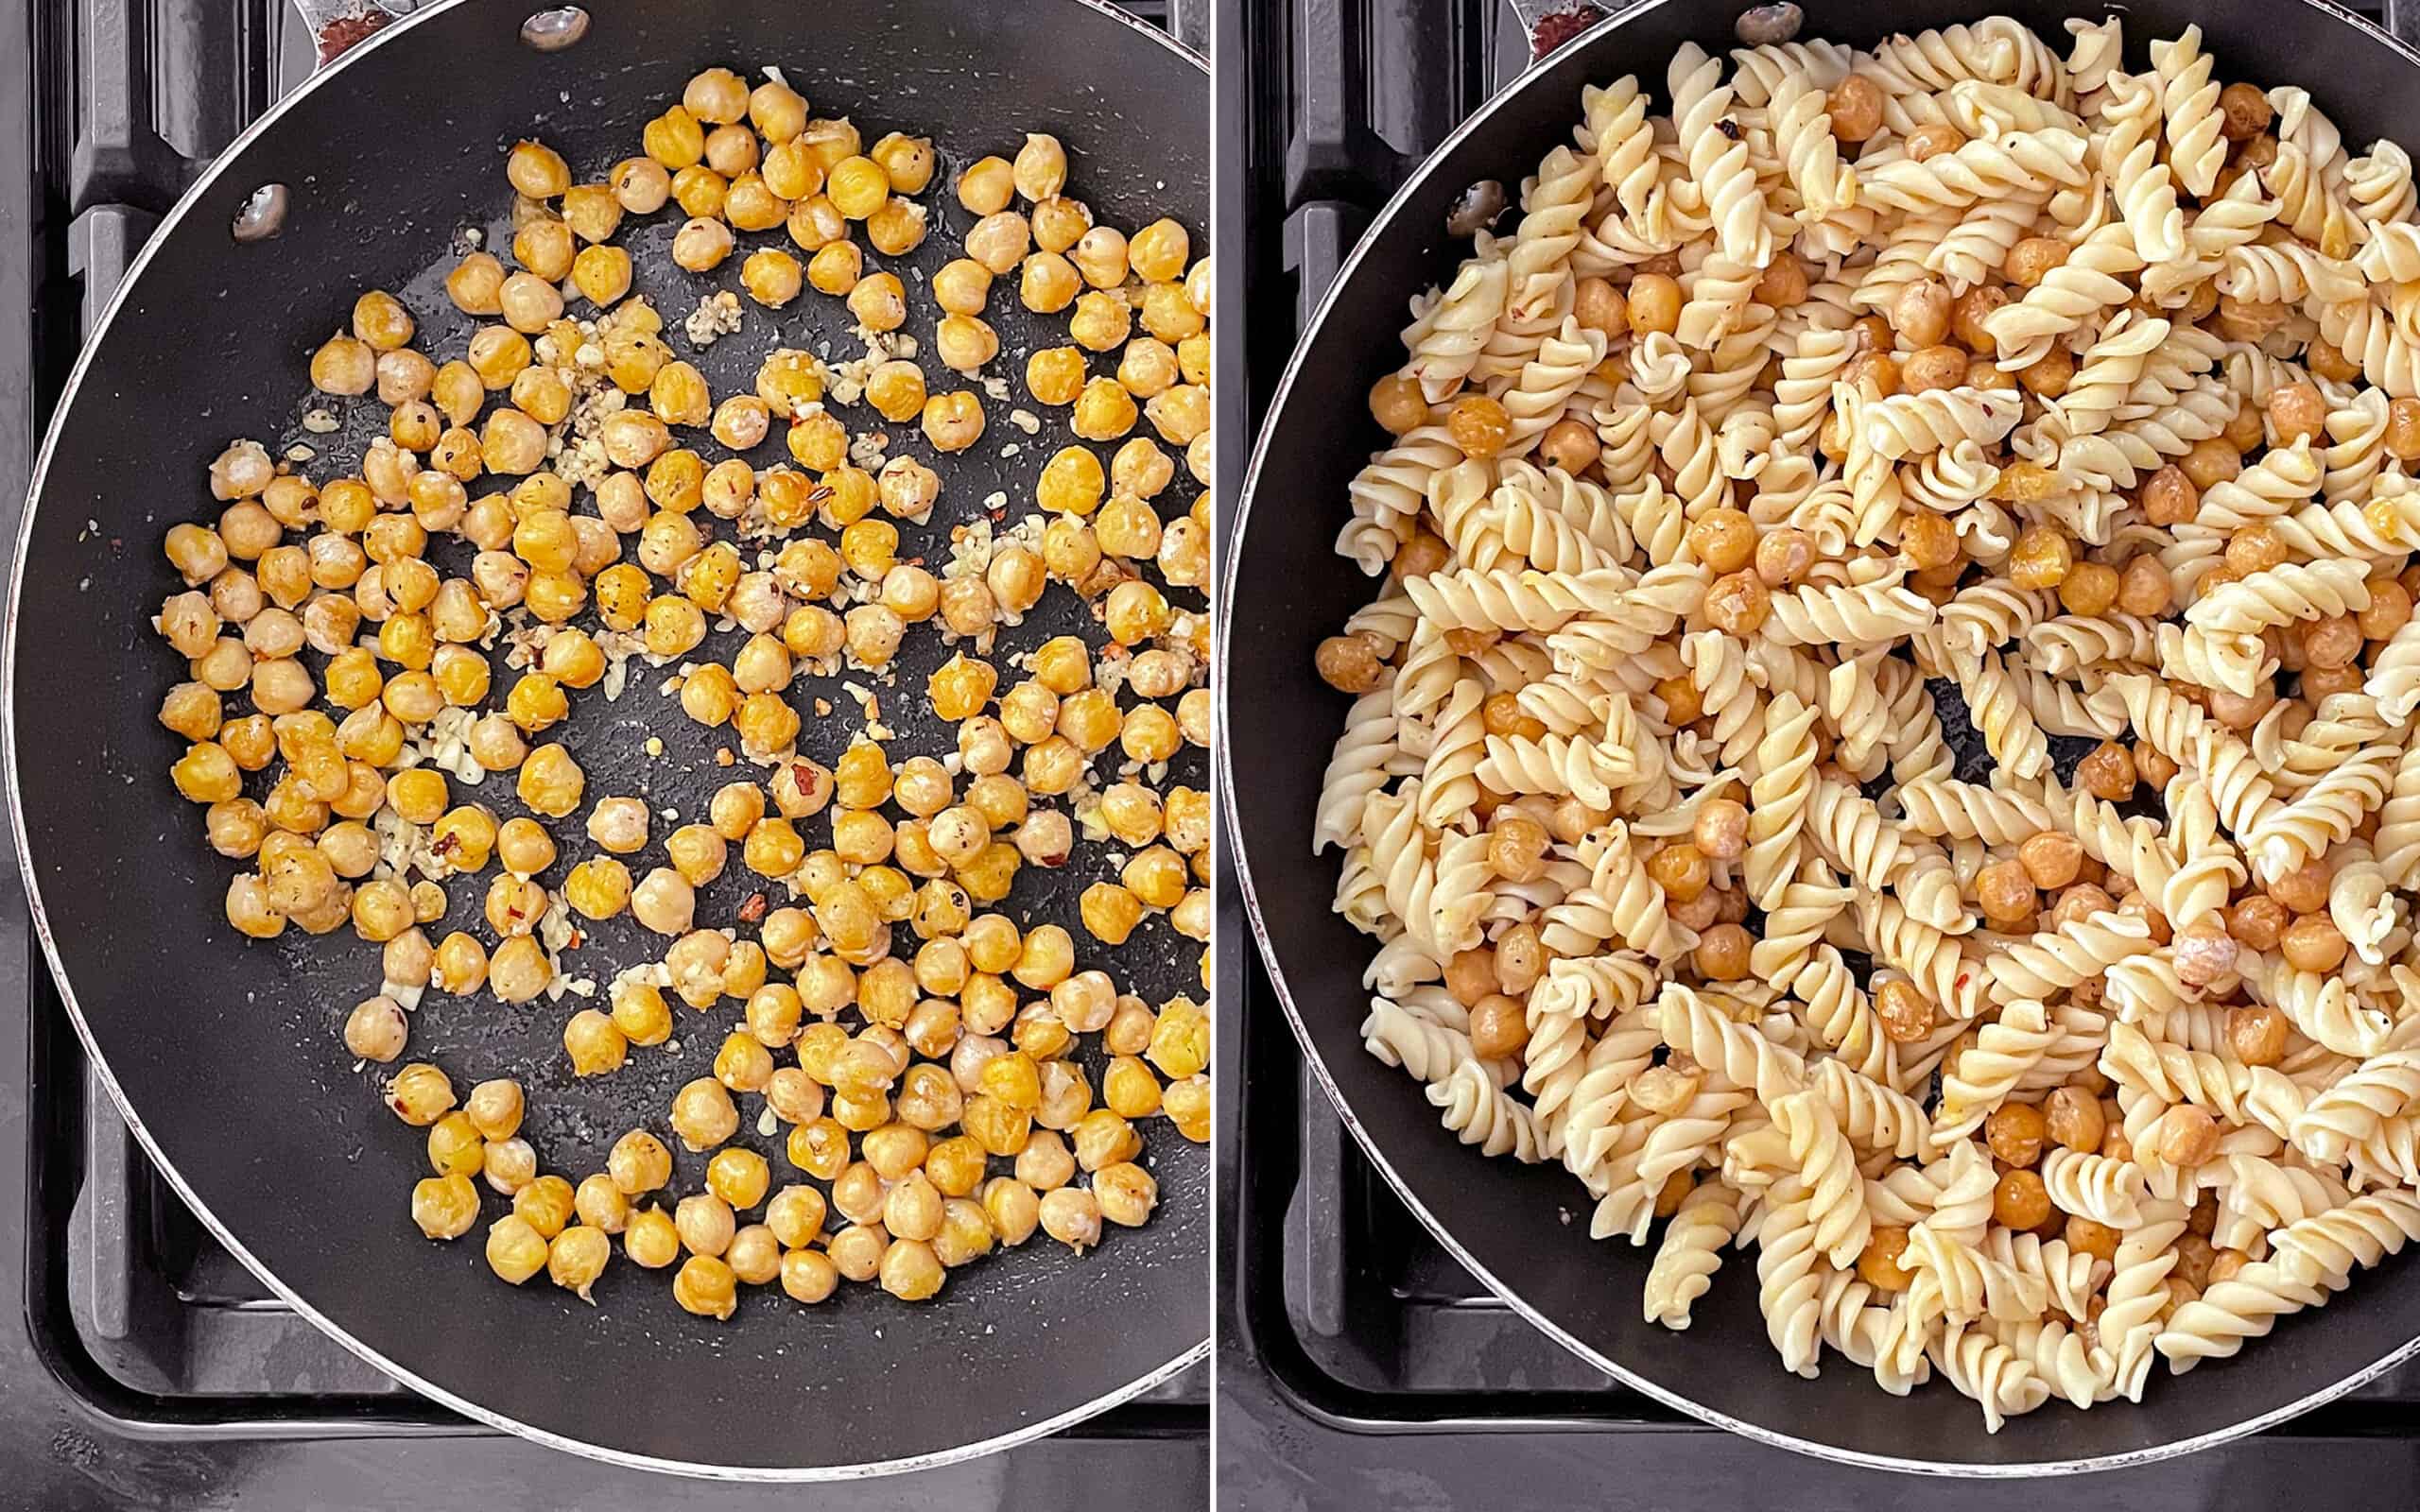 Add the garlic and spices to the sauteed chickpeas in the skillet. Stir in the pasta.